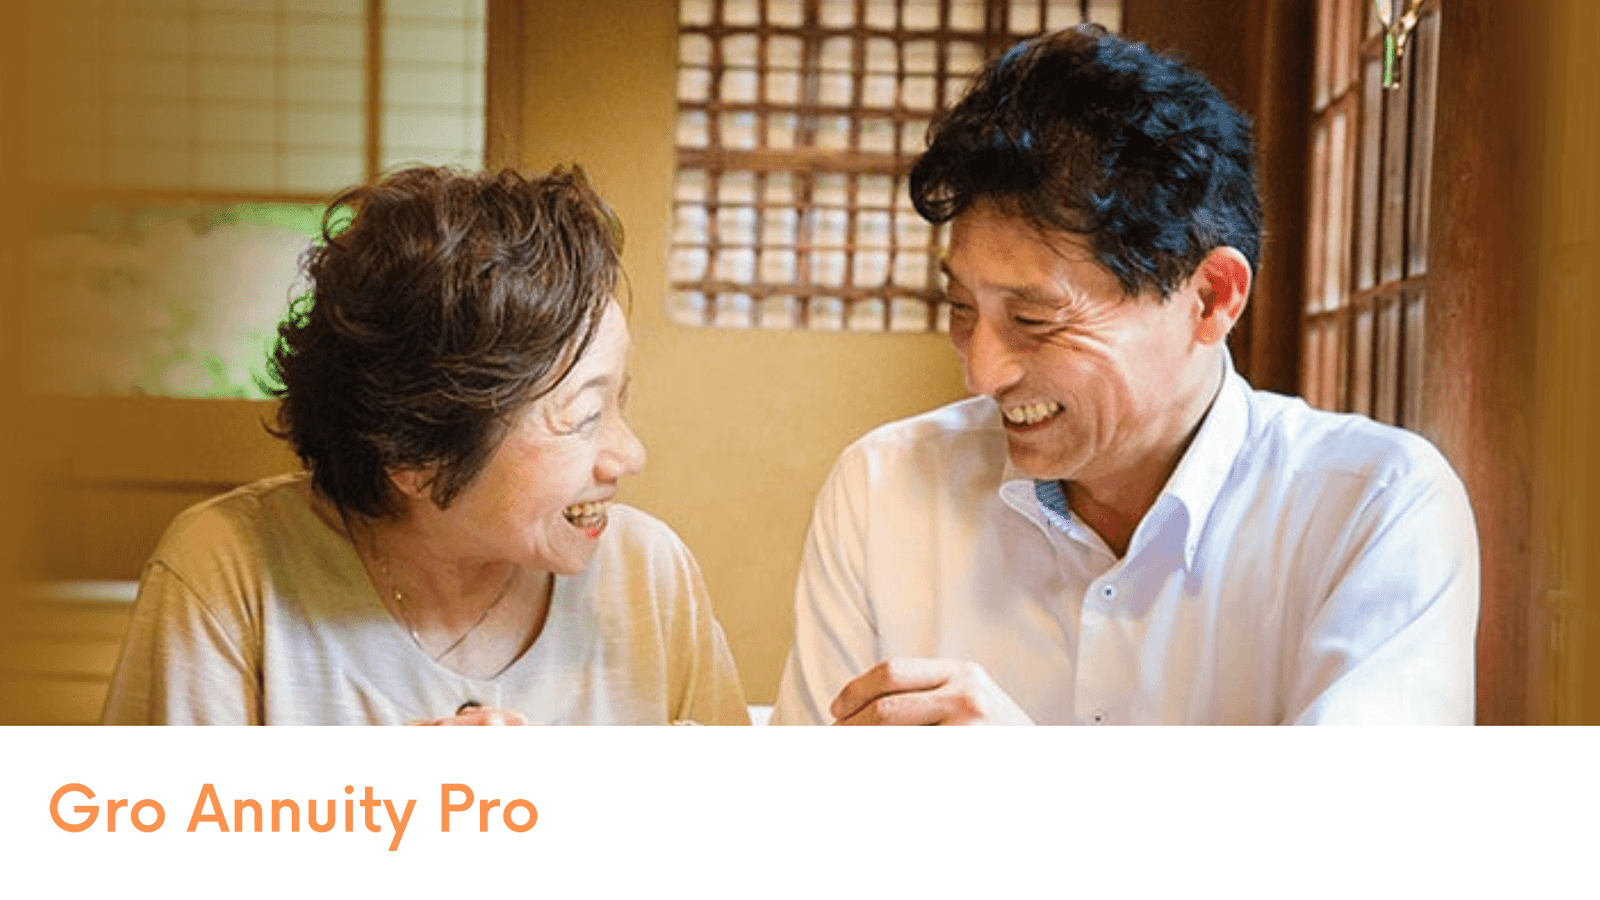 NTUC Income Gro Annuity Pro